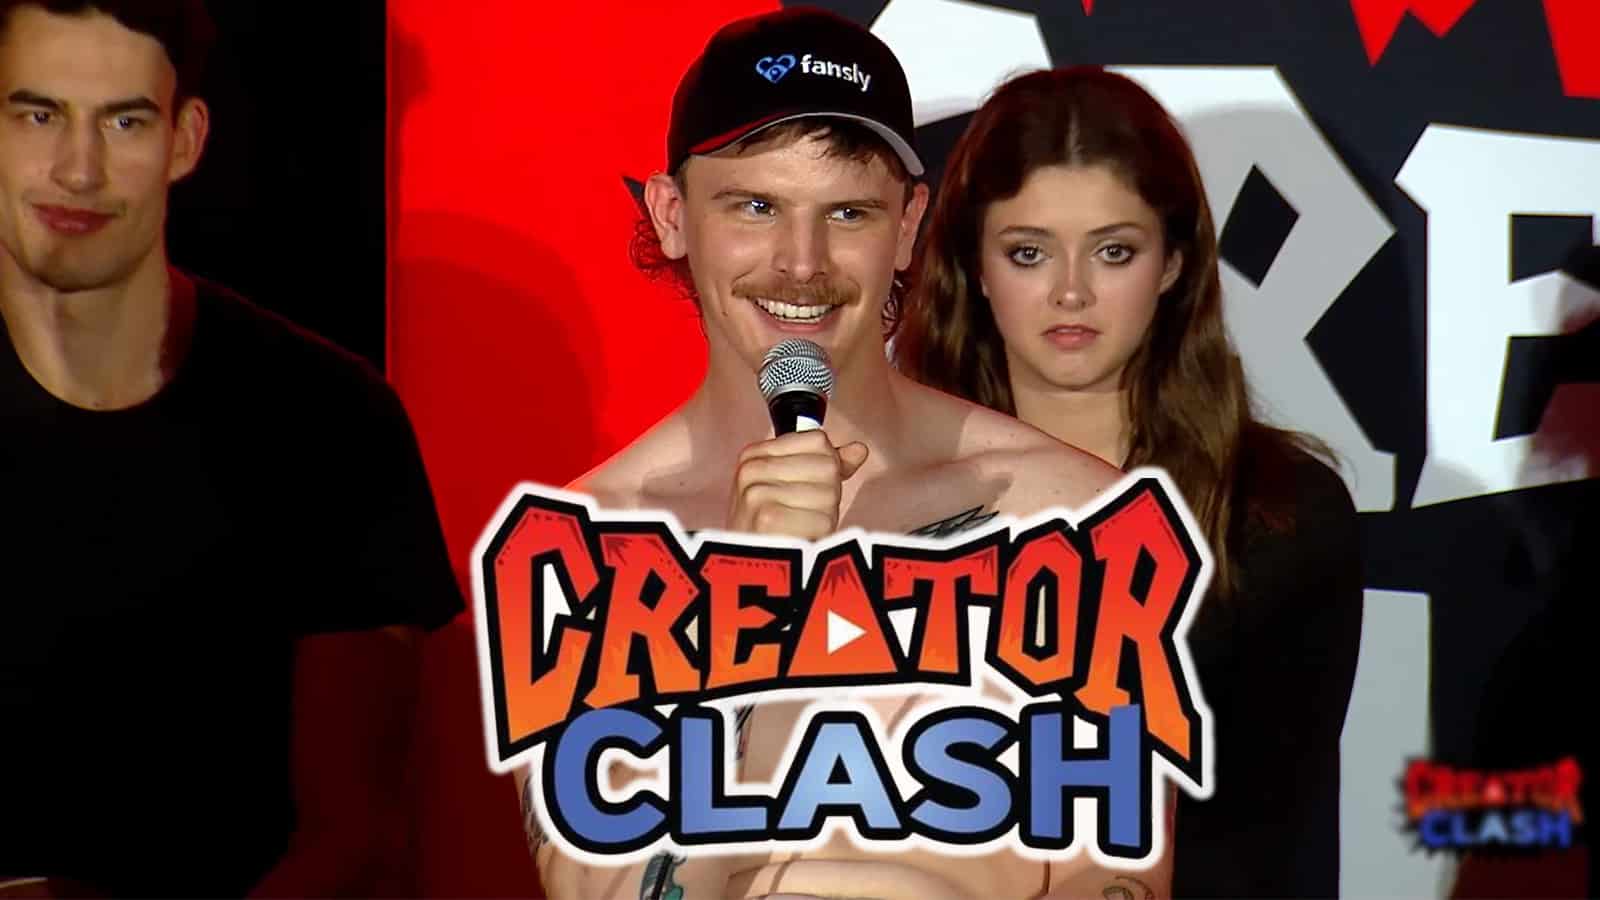 iDubbbz' Creator Clash: Winners, Losers, Results, and Analysis